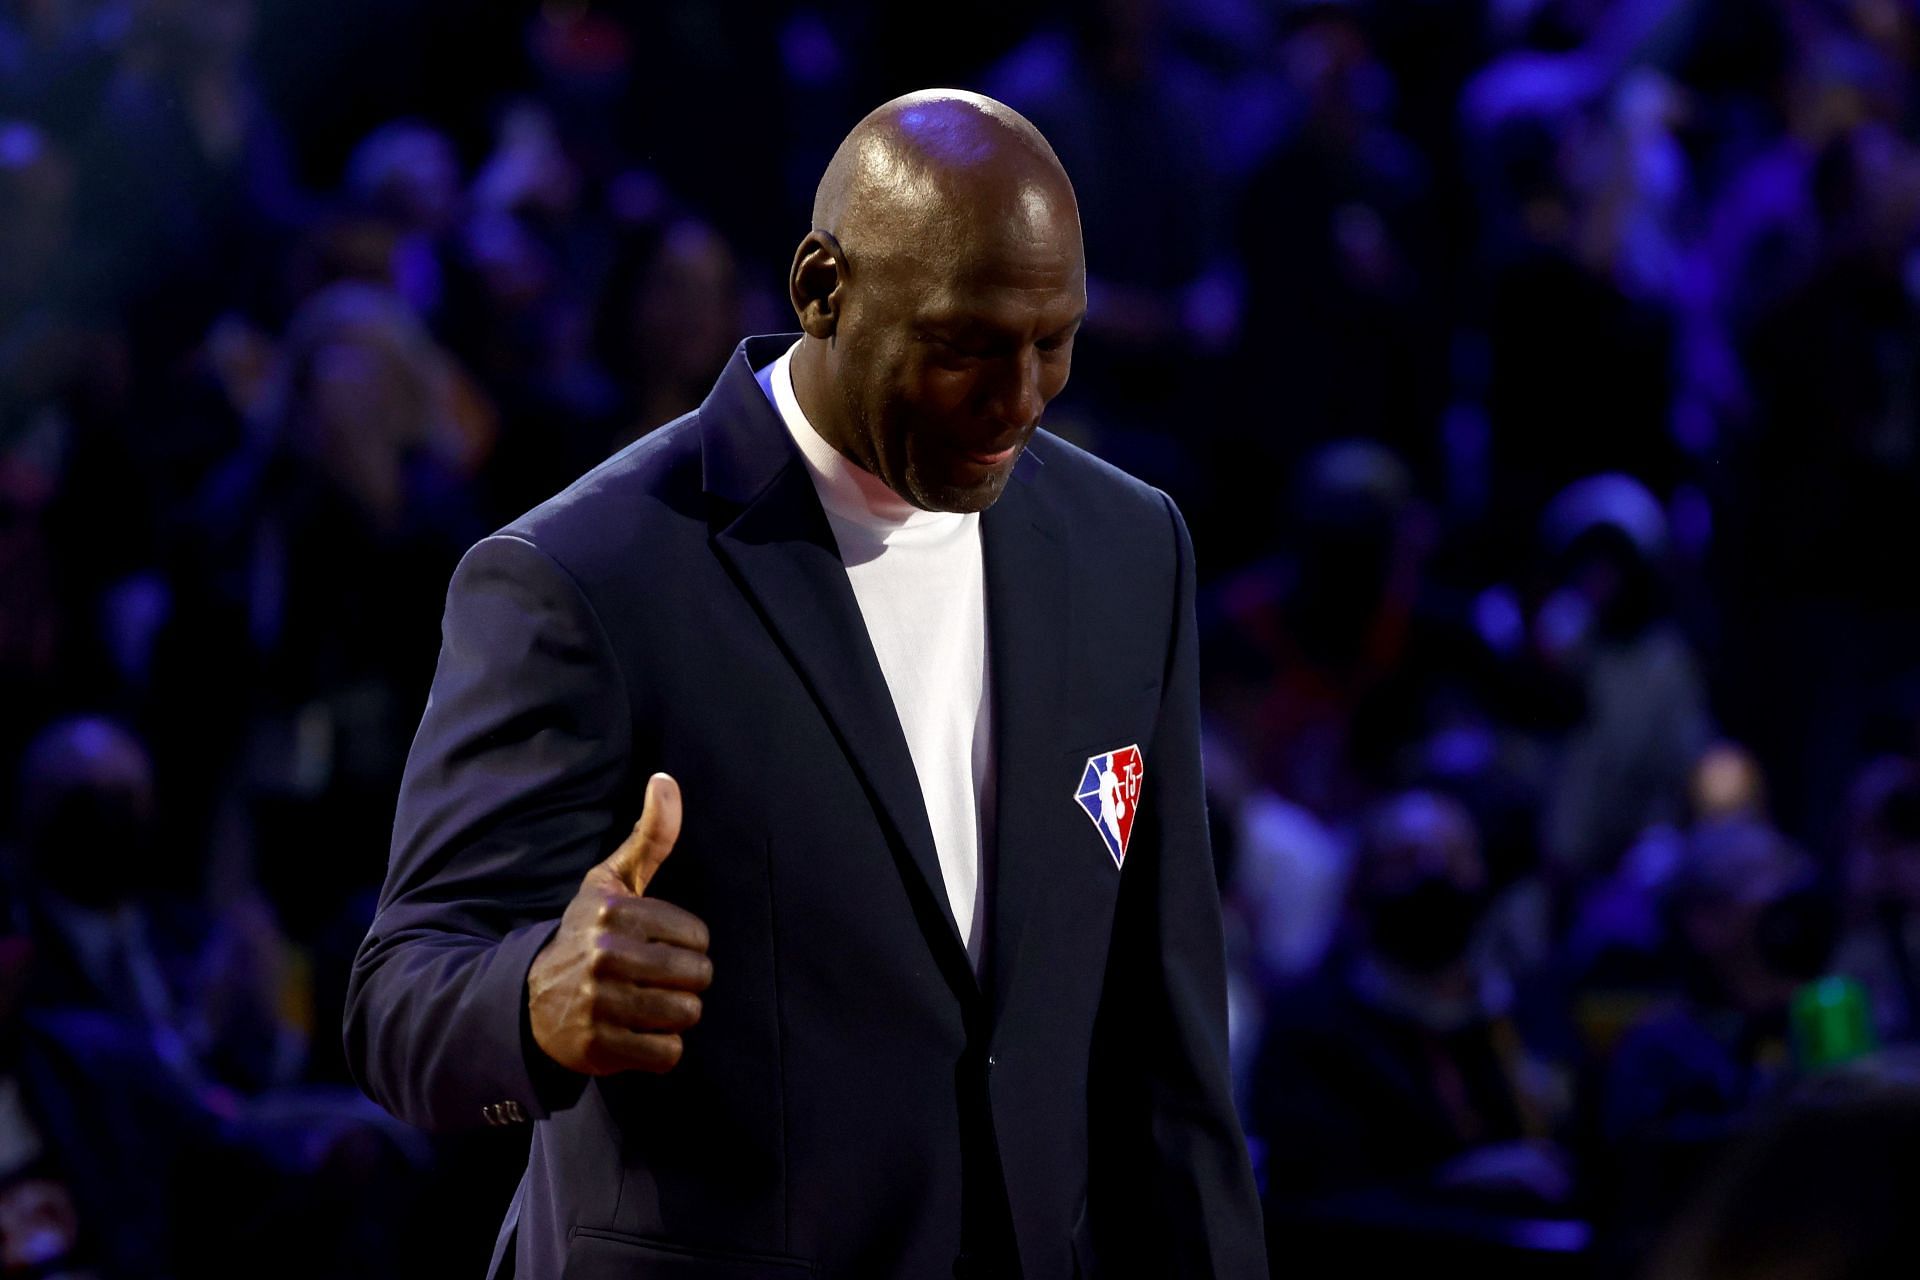 Michael Jordan has been the majority owner of the Charlotte Hornets since 2010.